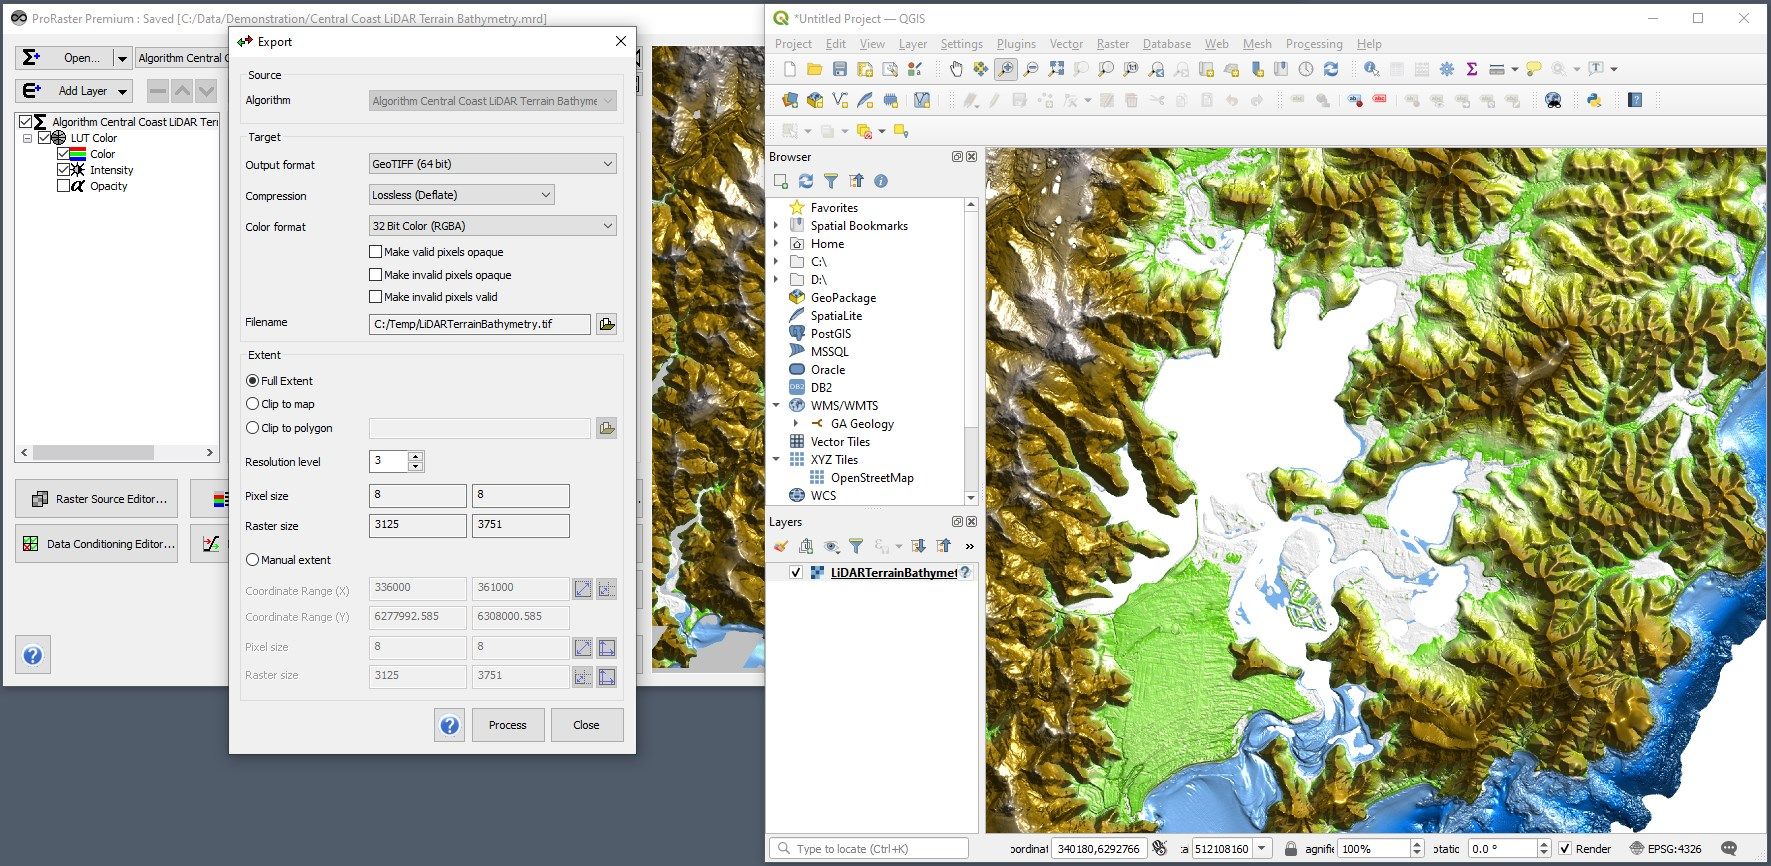 Export to located image rasters that you can display in any GIS application, like QGIS